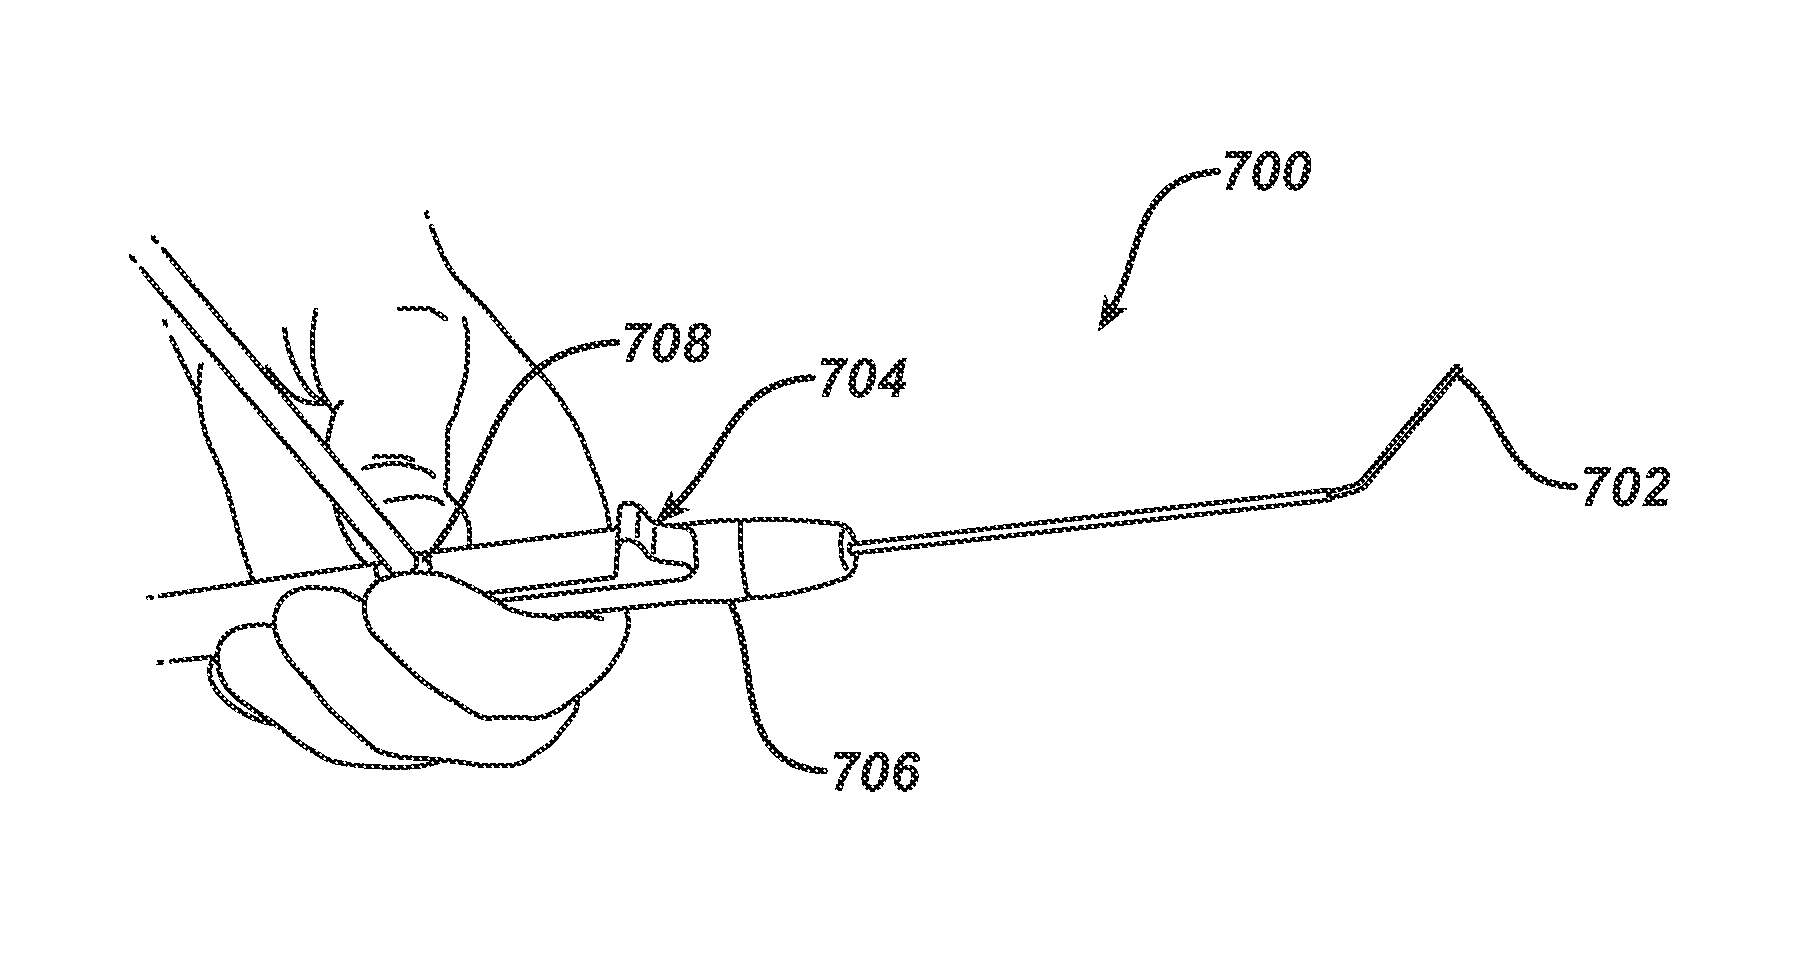 Devices and Method for Maxillary Sinus Lavage